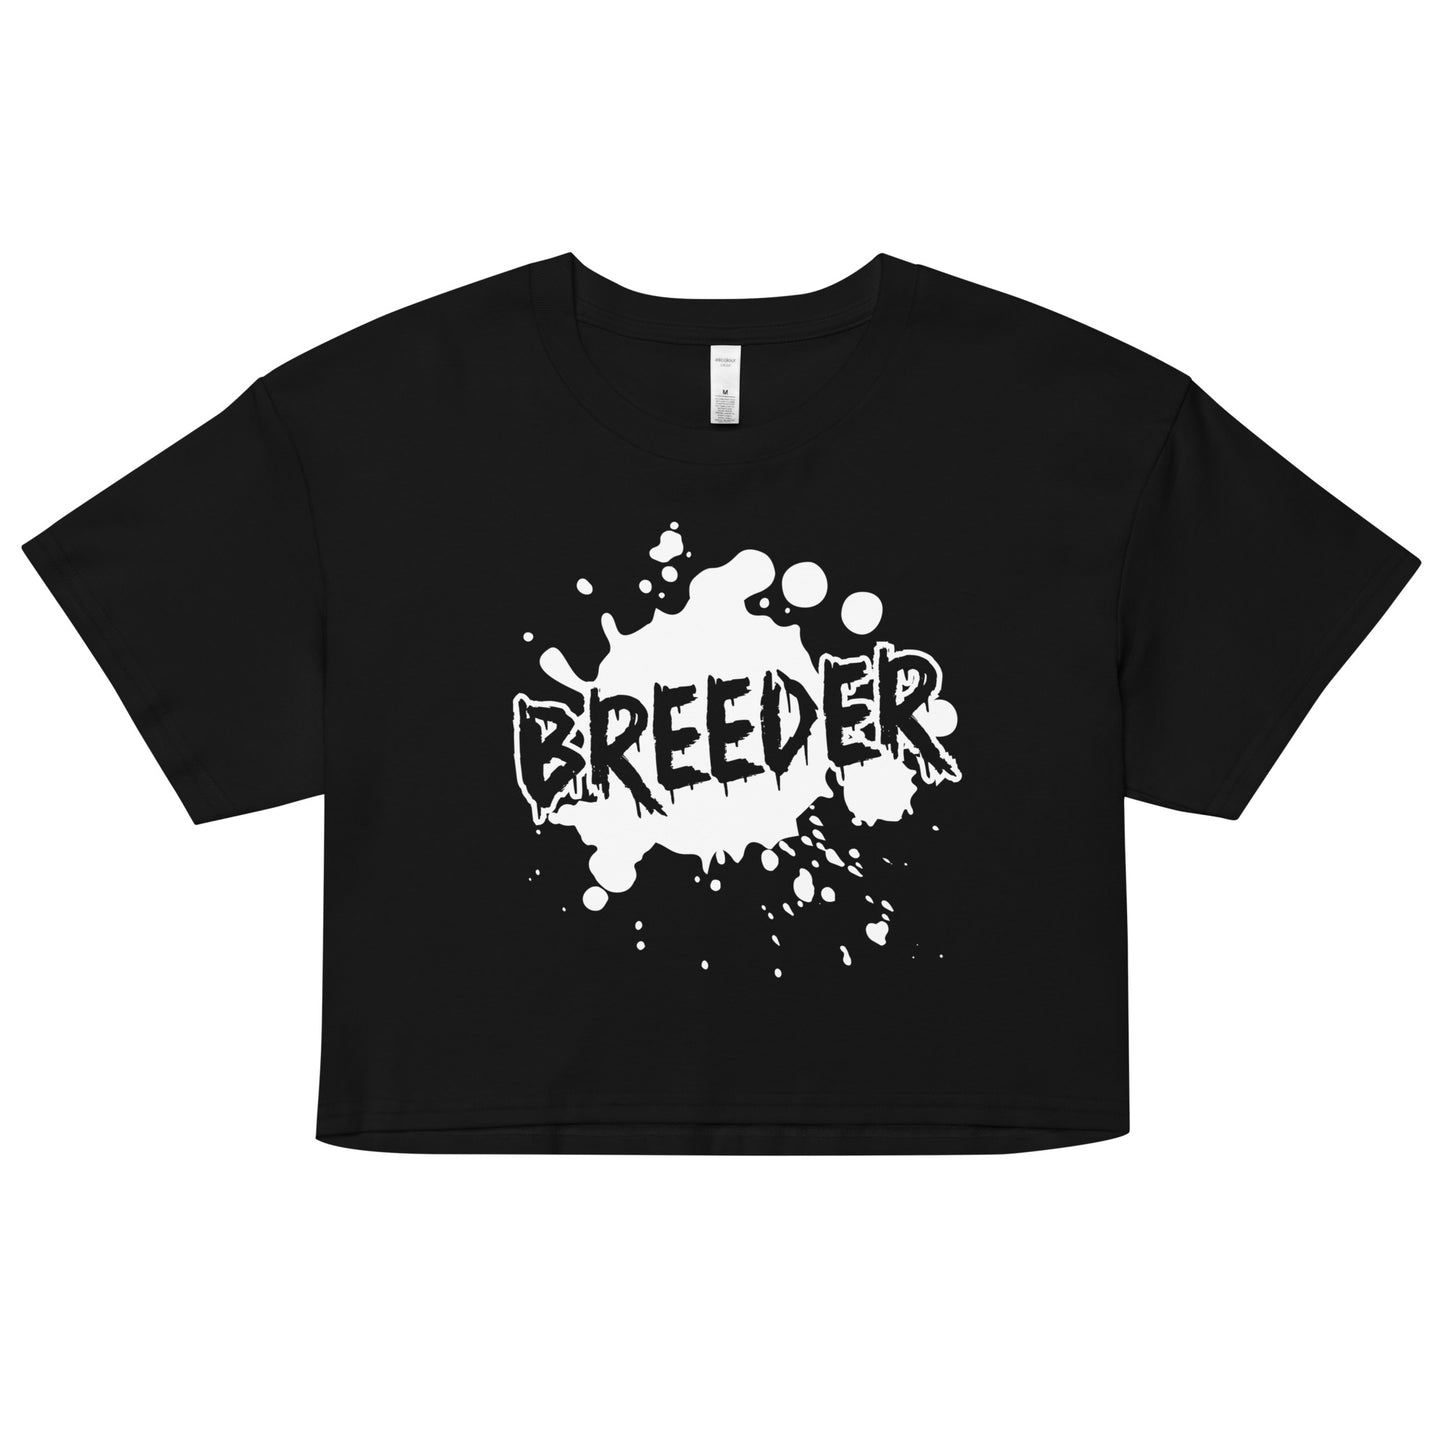 Shop the empowering 'Breeder' crop top, a fun and bold fashion choice for gay tops. Embrace your confidence and celebrate your role with this playful and stylish crop top.